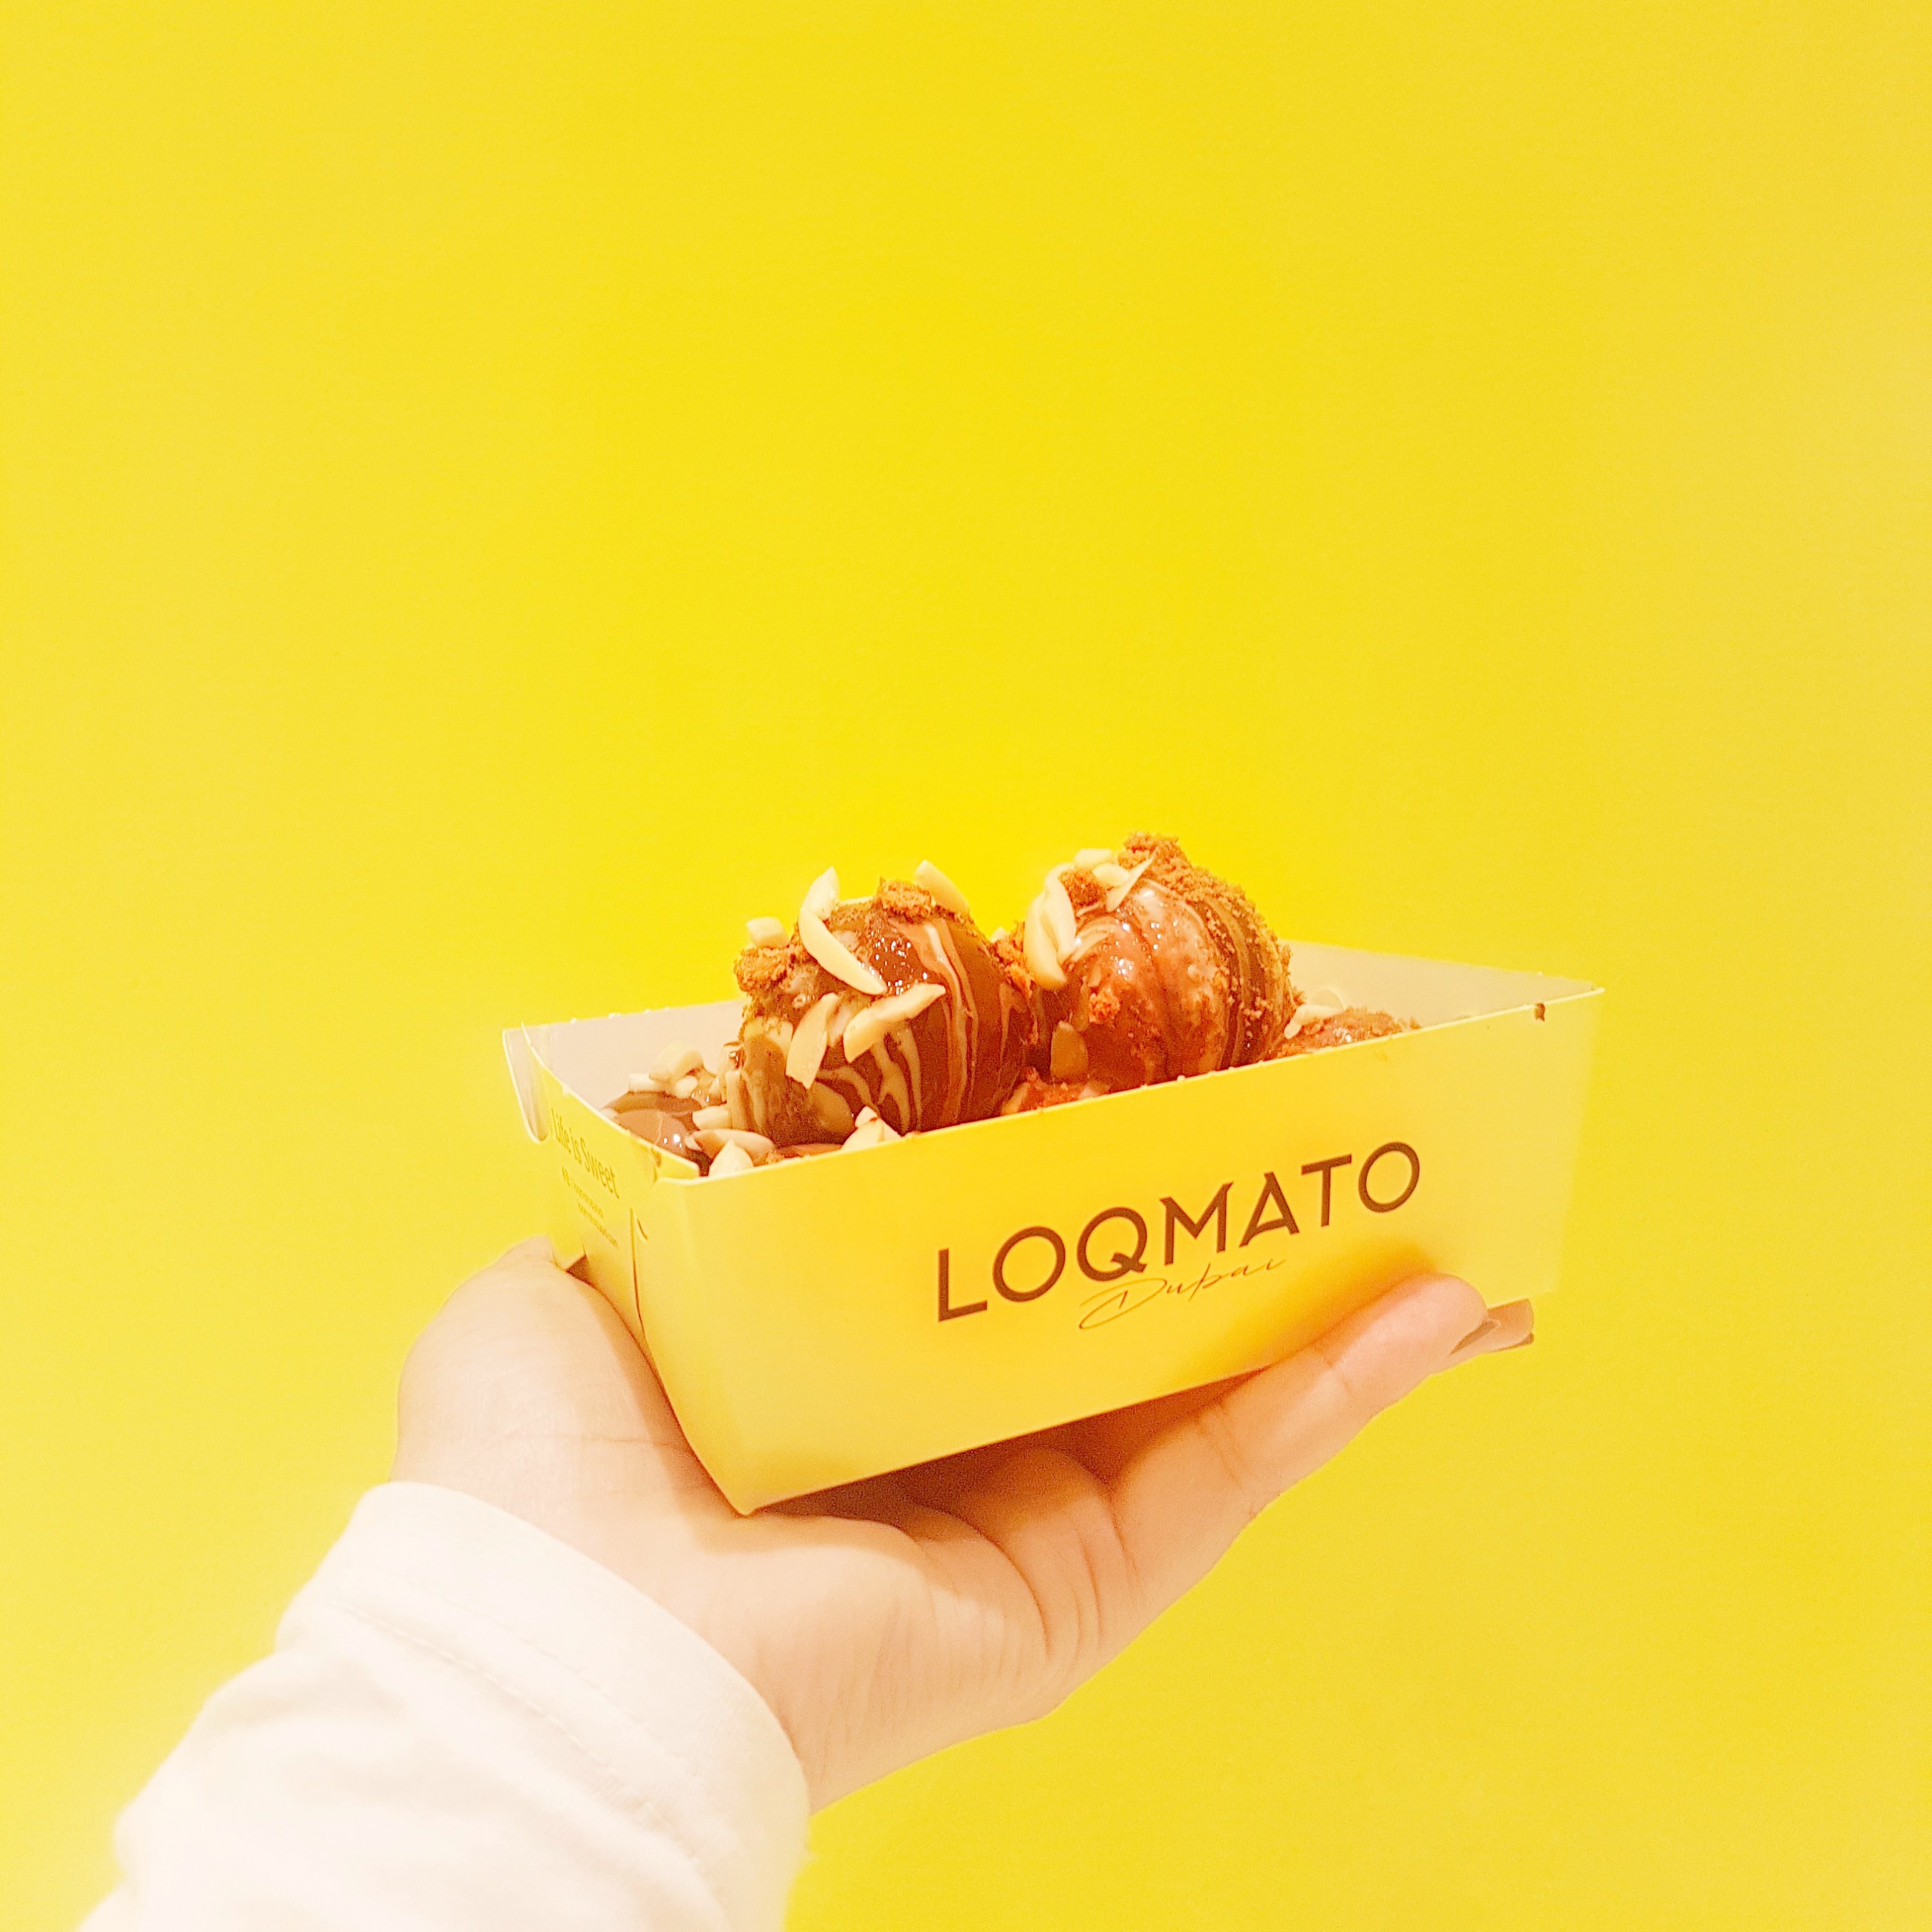 Loqmato, One bite is all it takes!